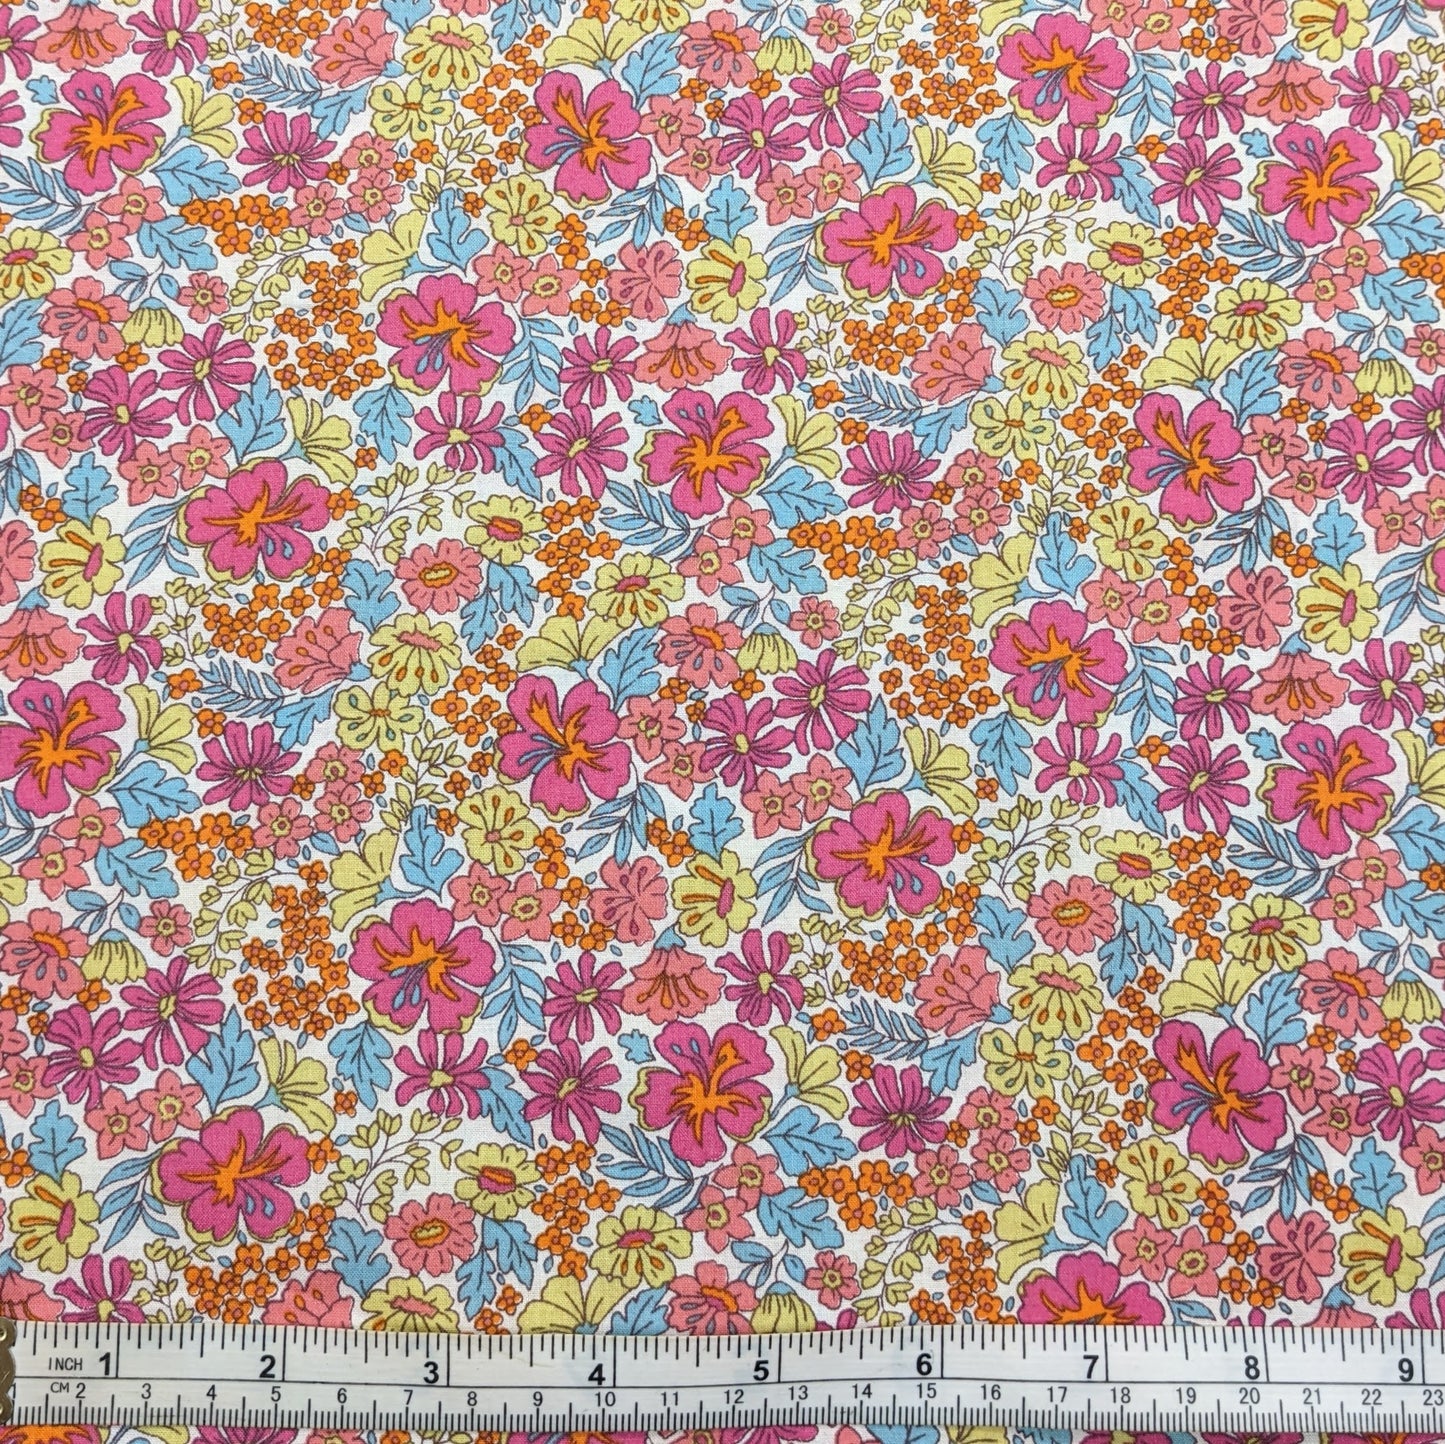 Cotton Lawn Fabric – Candy Floral - Pink